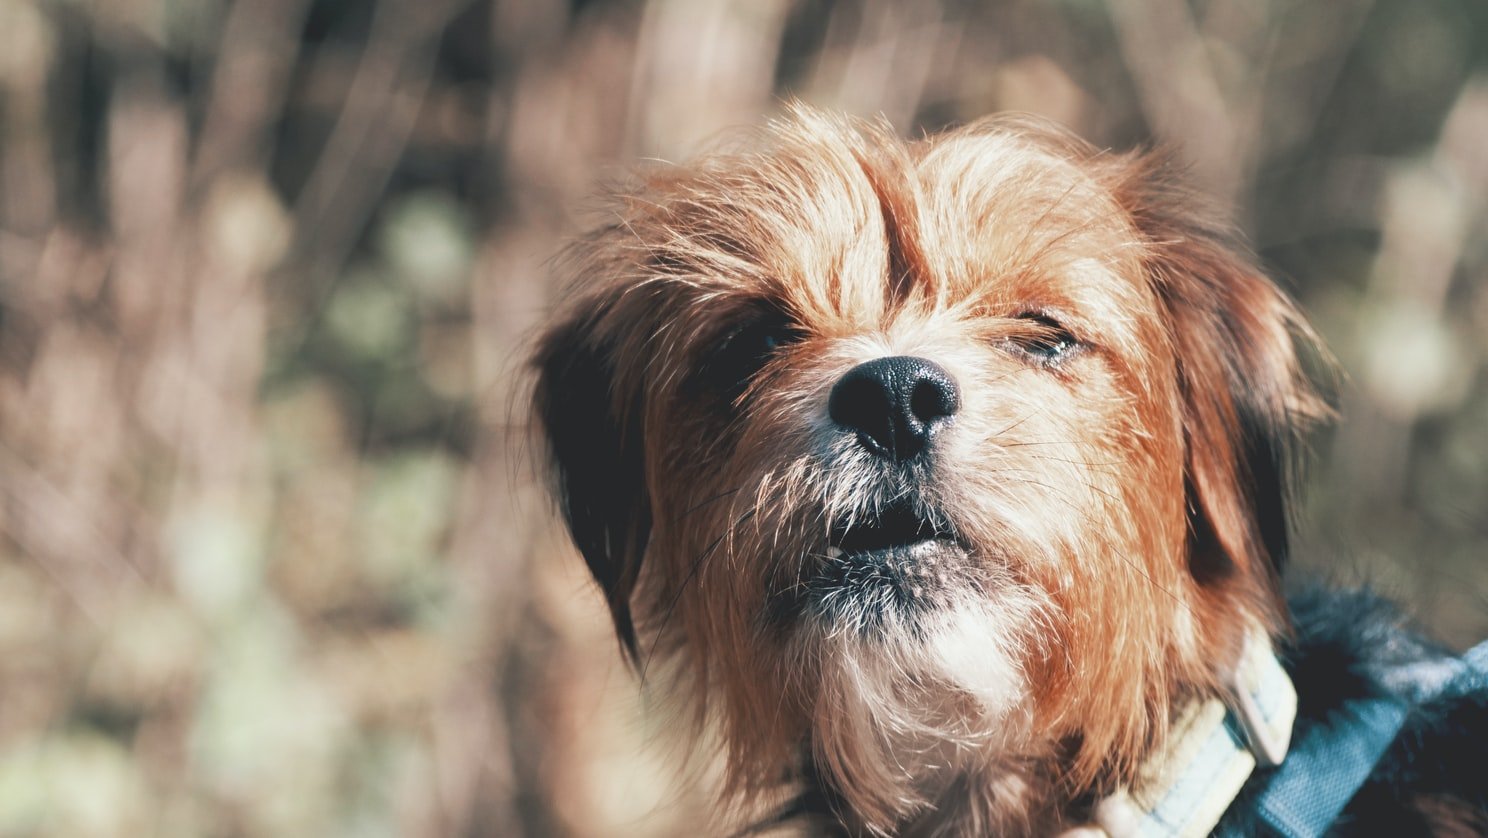 My neighbor had one of those pesky tiny dogs who bark all the time | Source: Unsplash